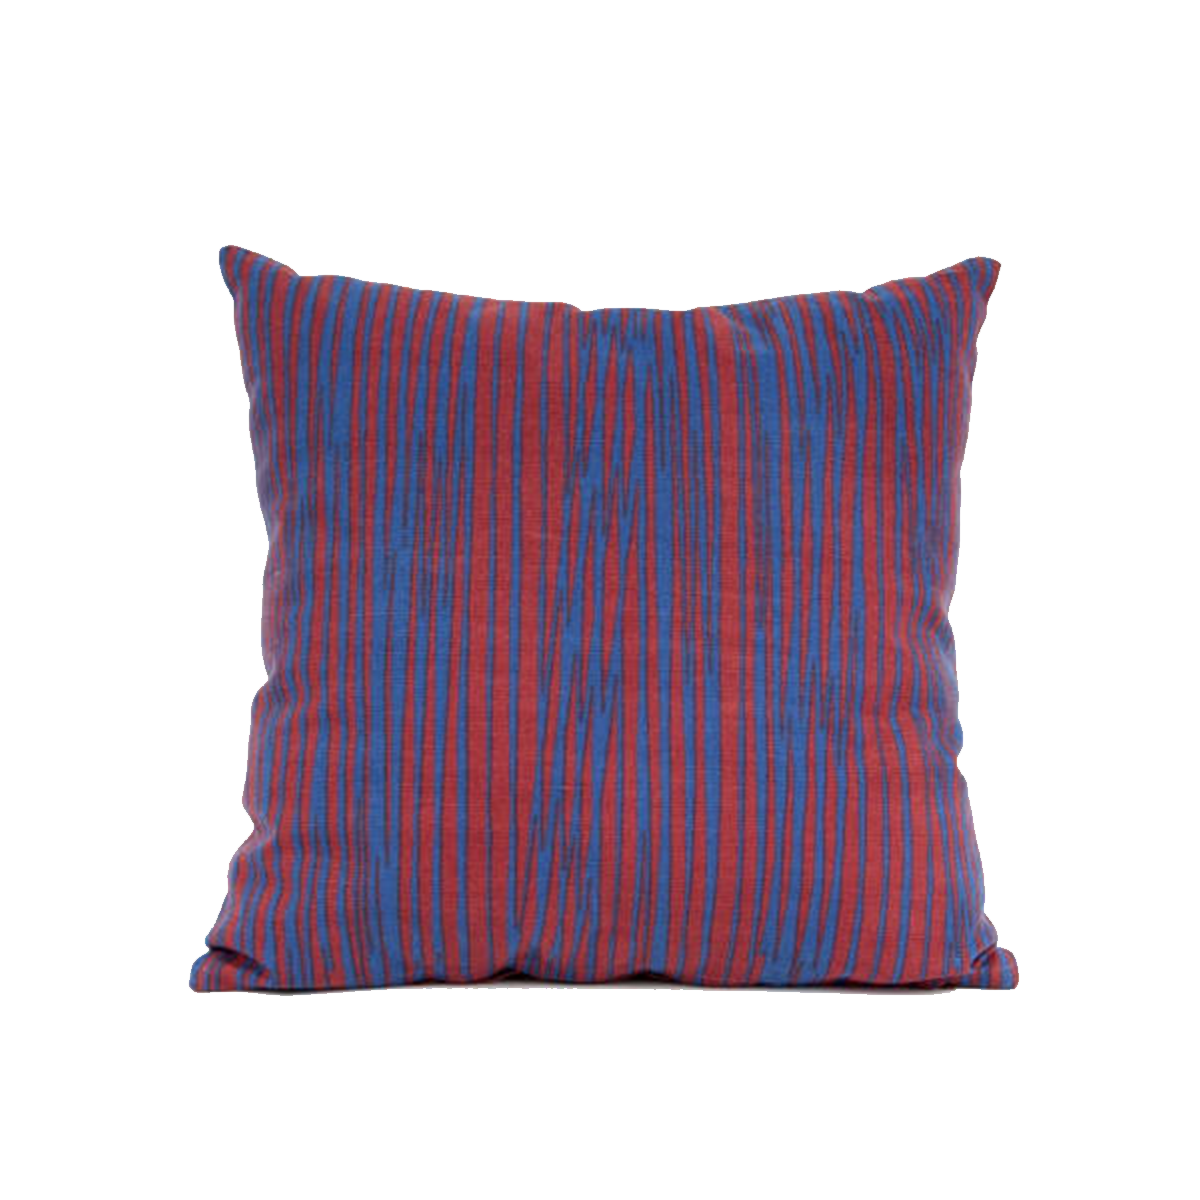 Red and blue lined cushion